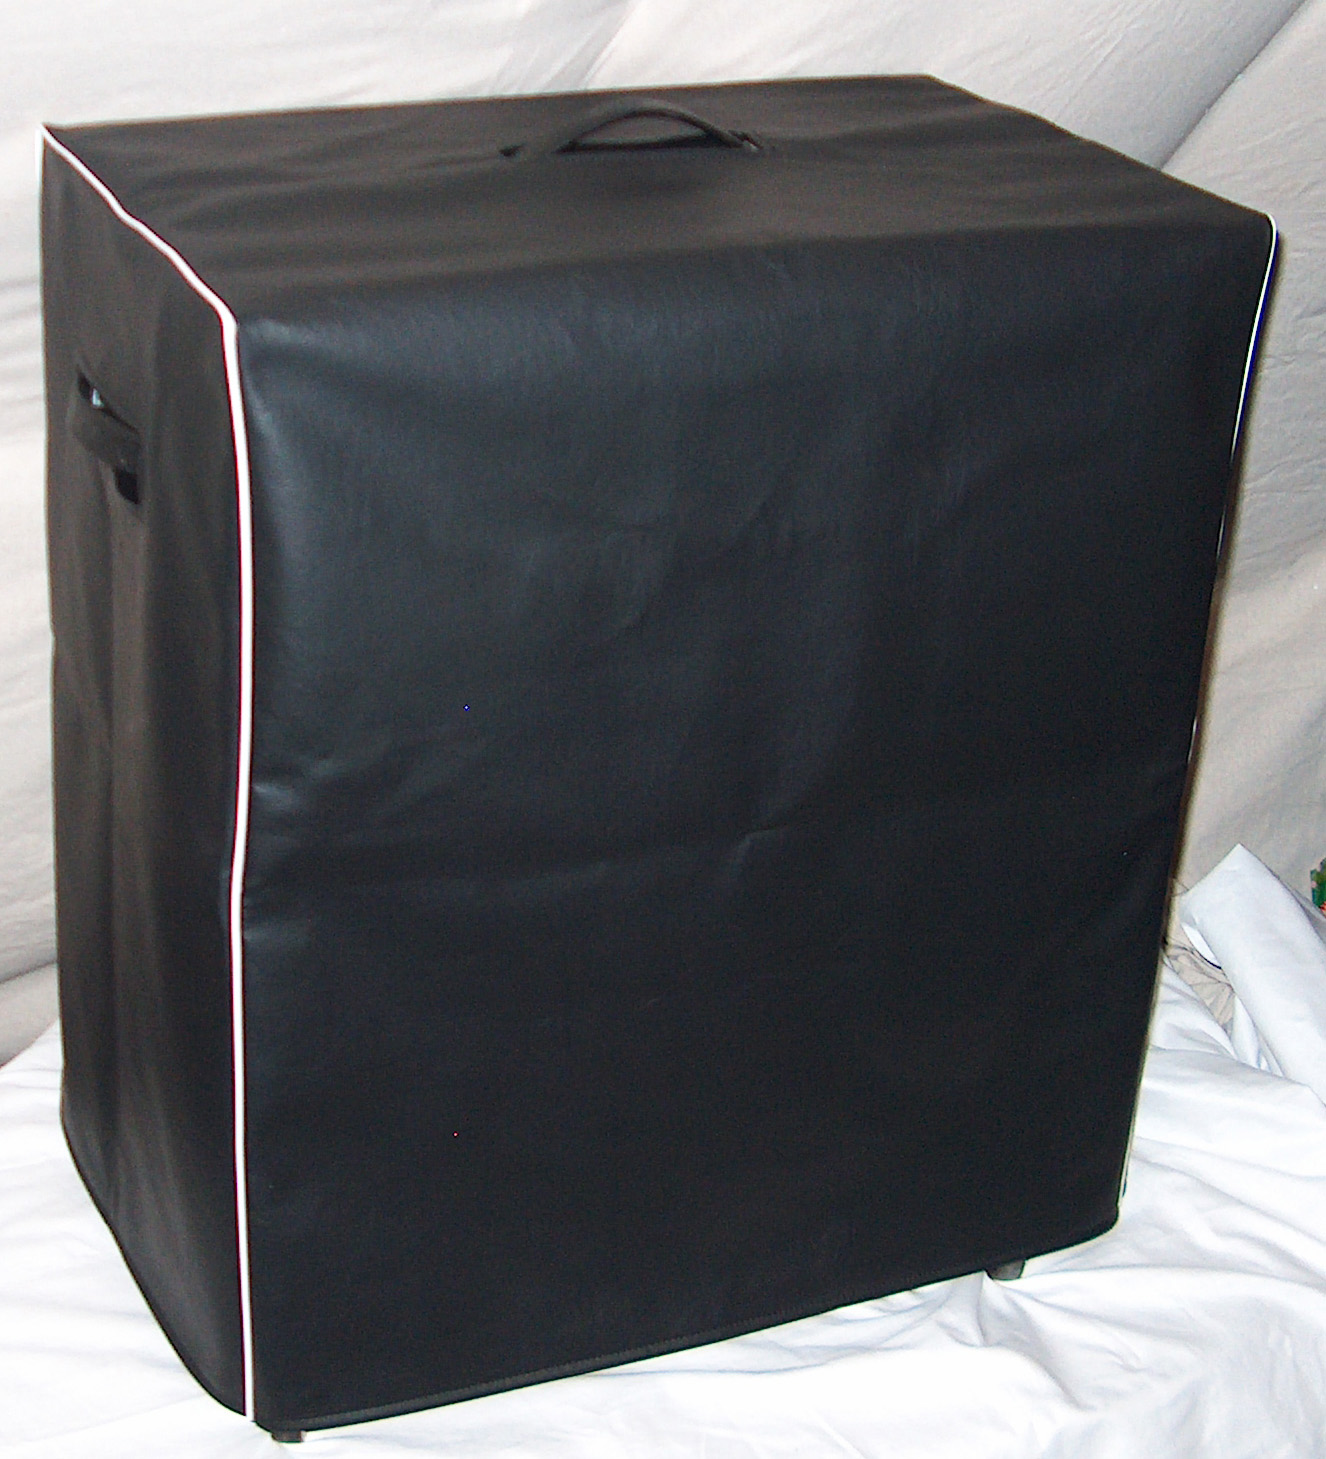 Example of  Black Vinyl Cover with White Piping.